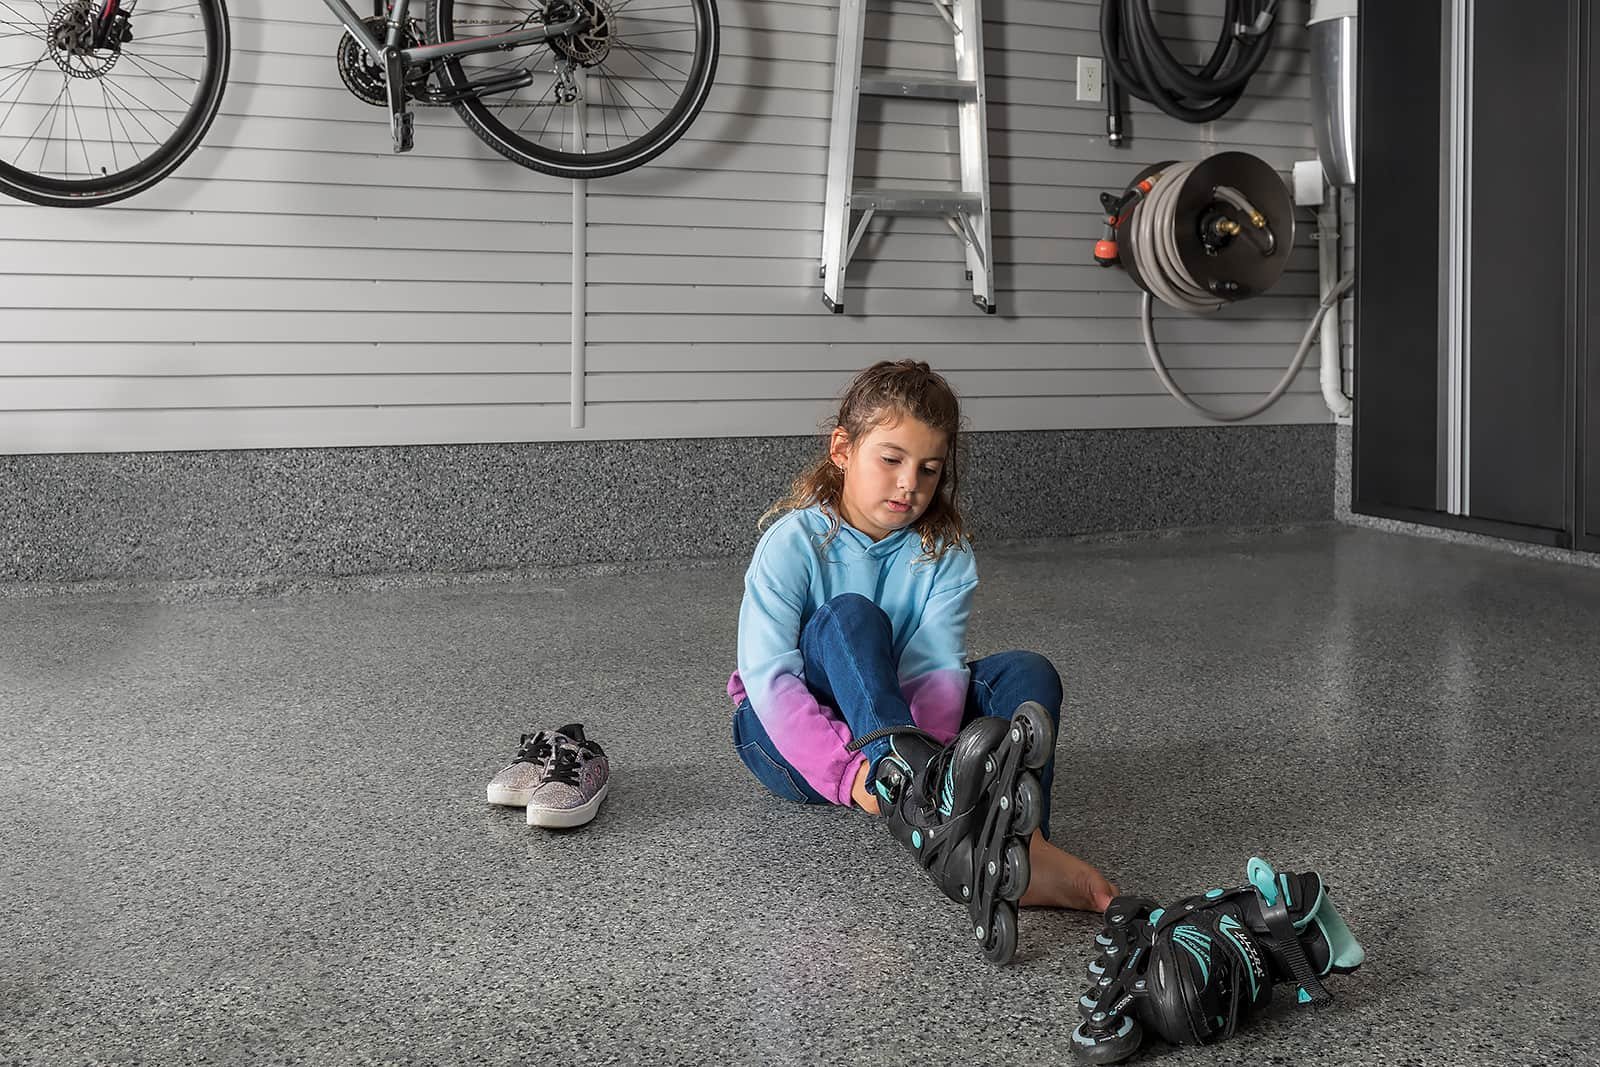 xgirl-putting-on-roller-blades-fitness-room-garage.jpg.pagespeed.ic.8zpURNIzSc